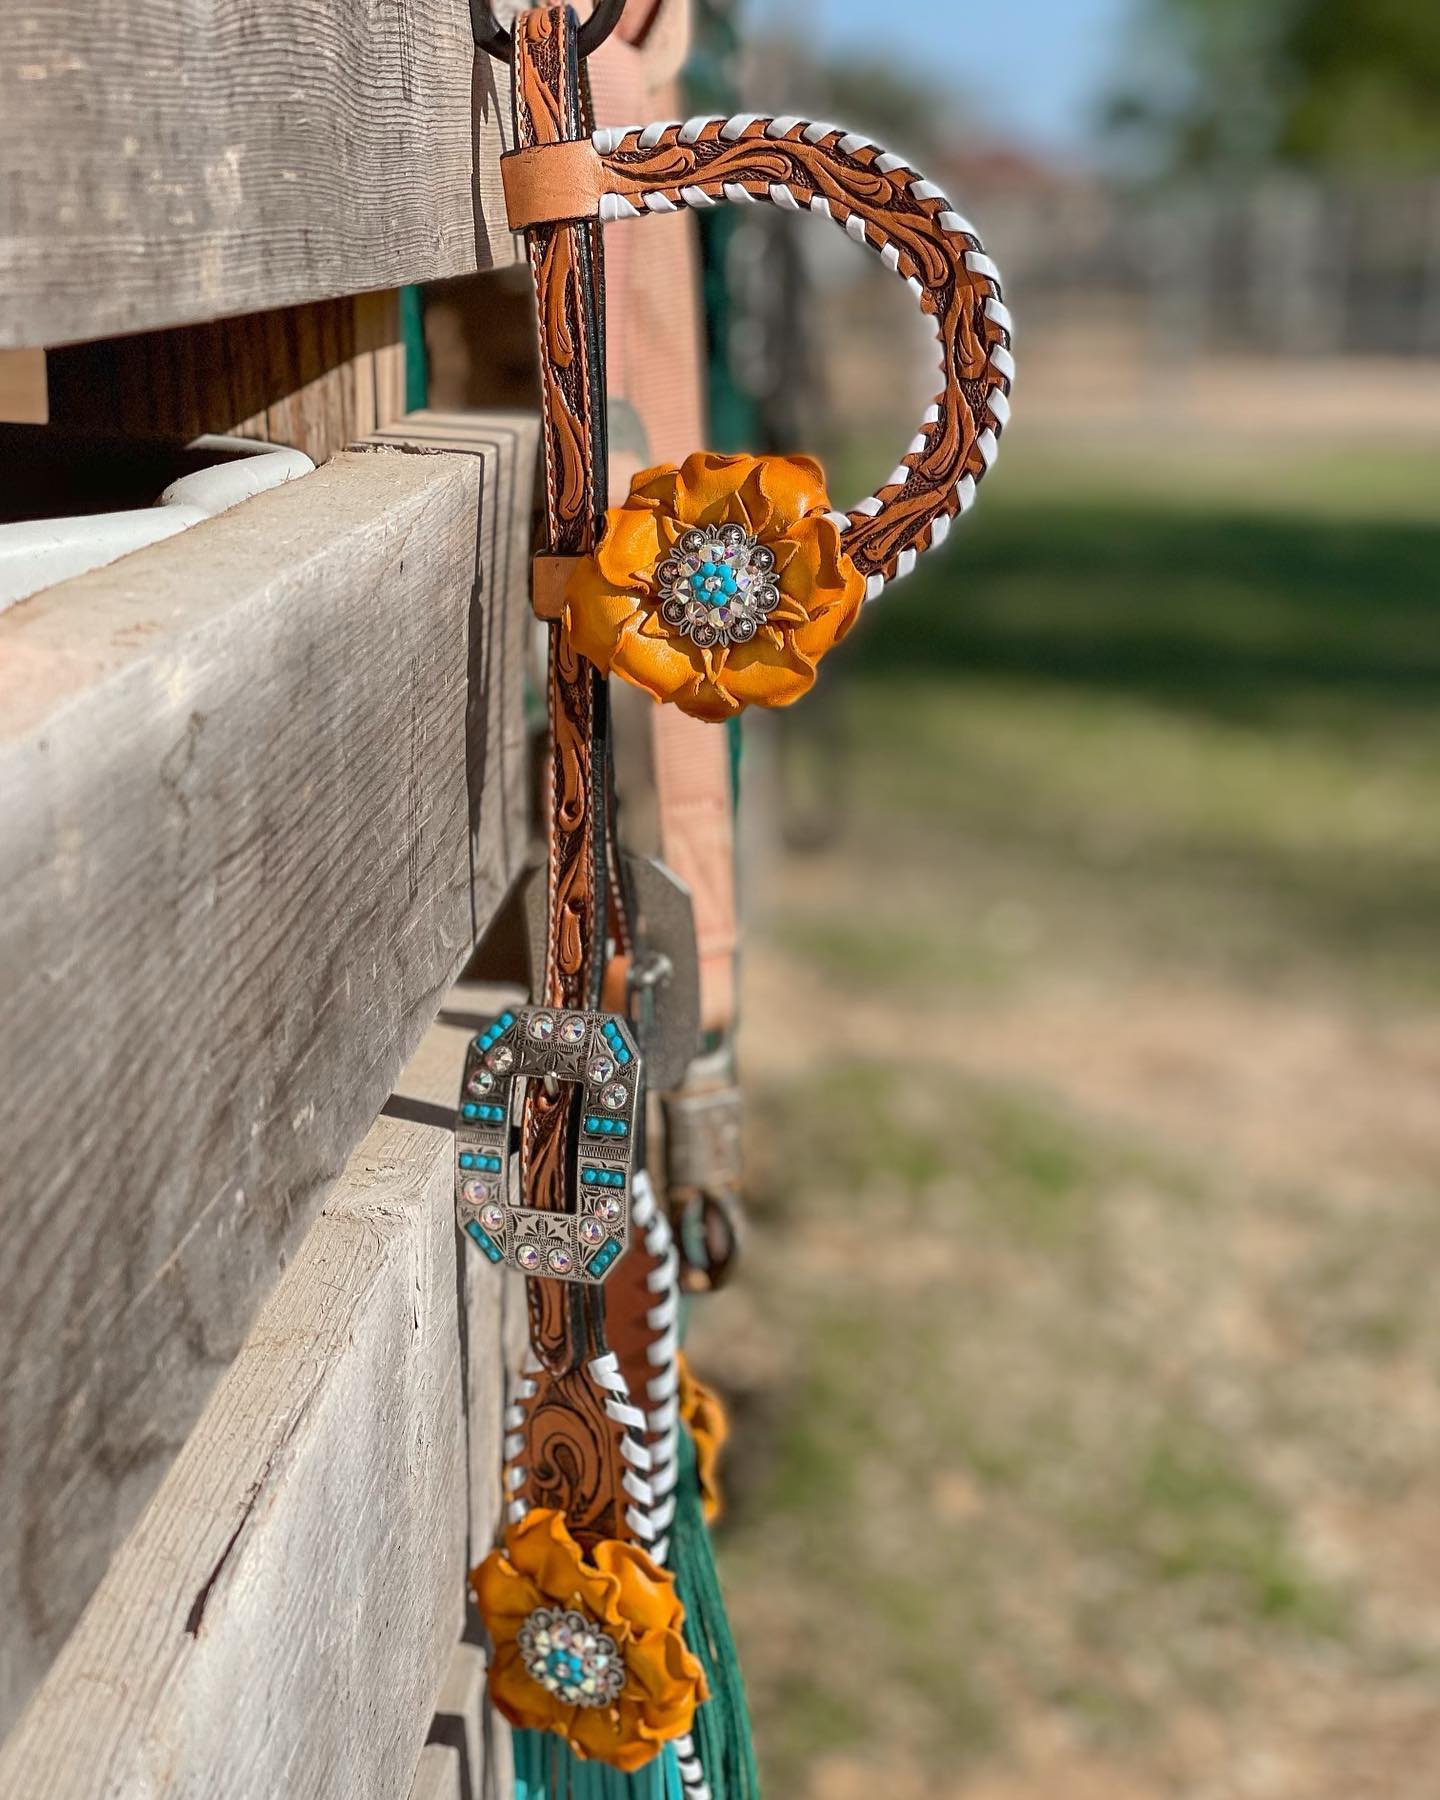 White Whipstitch Yellow and Turquoise Browband/One Ear Headstall & Breastcollar Tack Set #OEBC411 - RODEO DRIVE